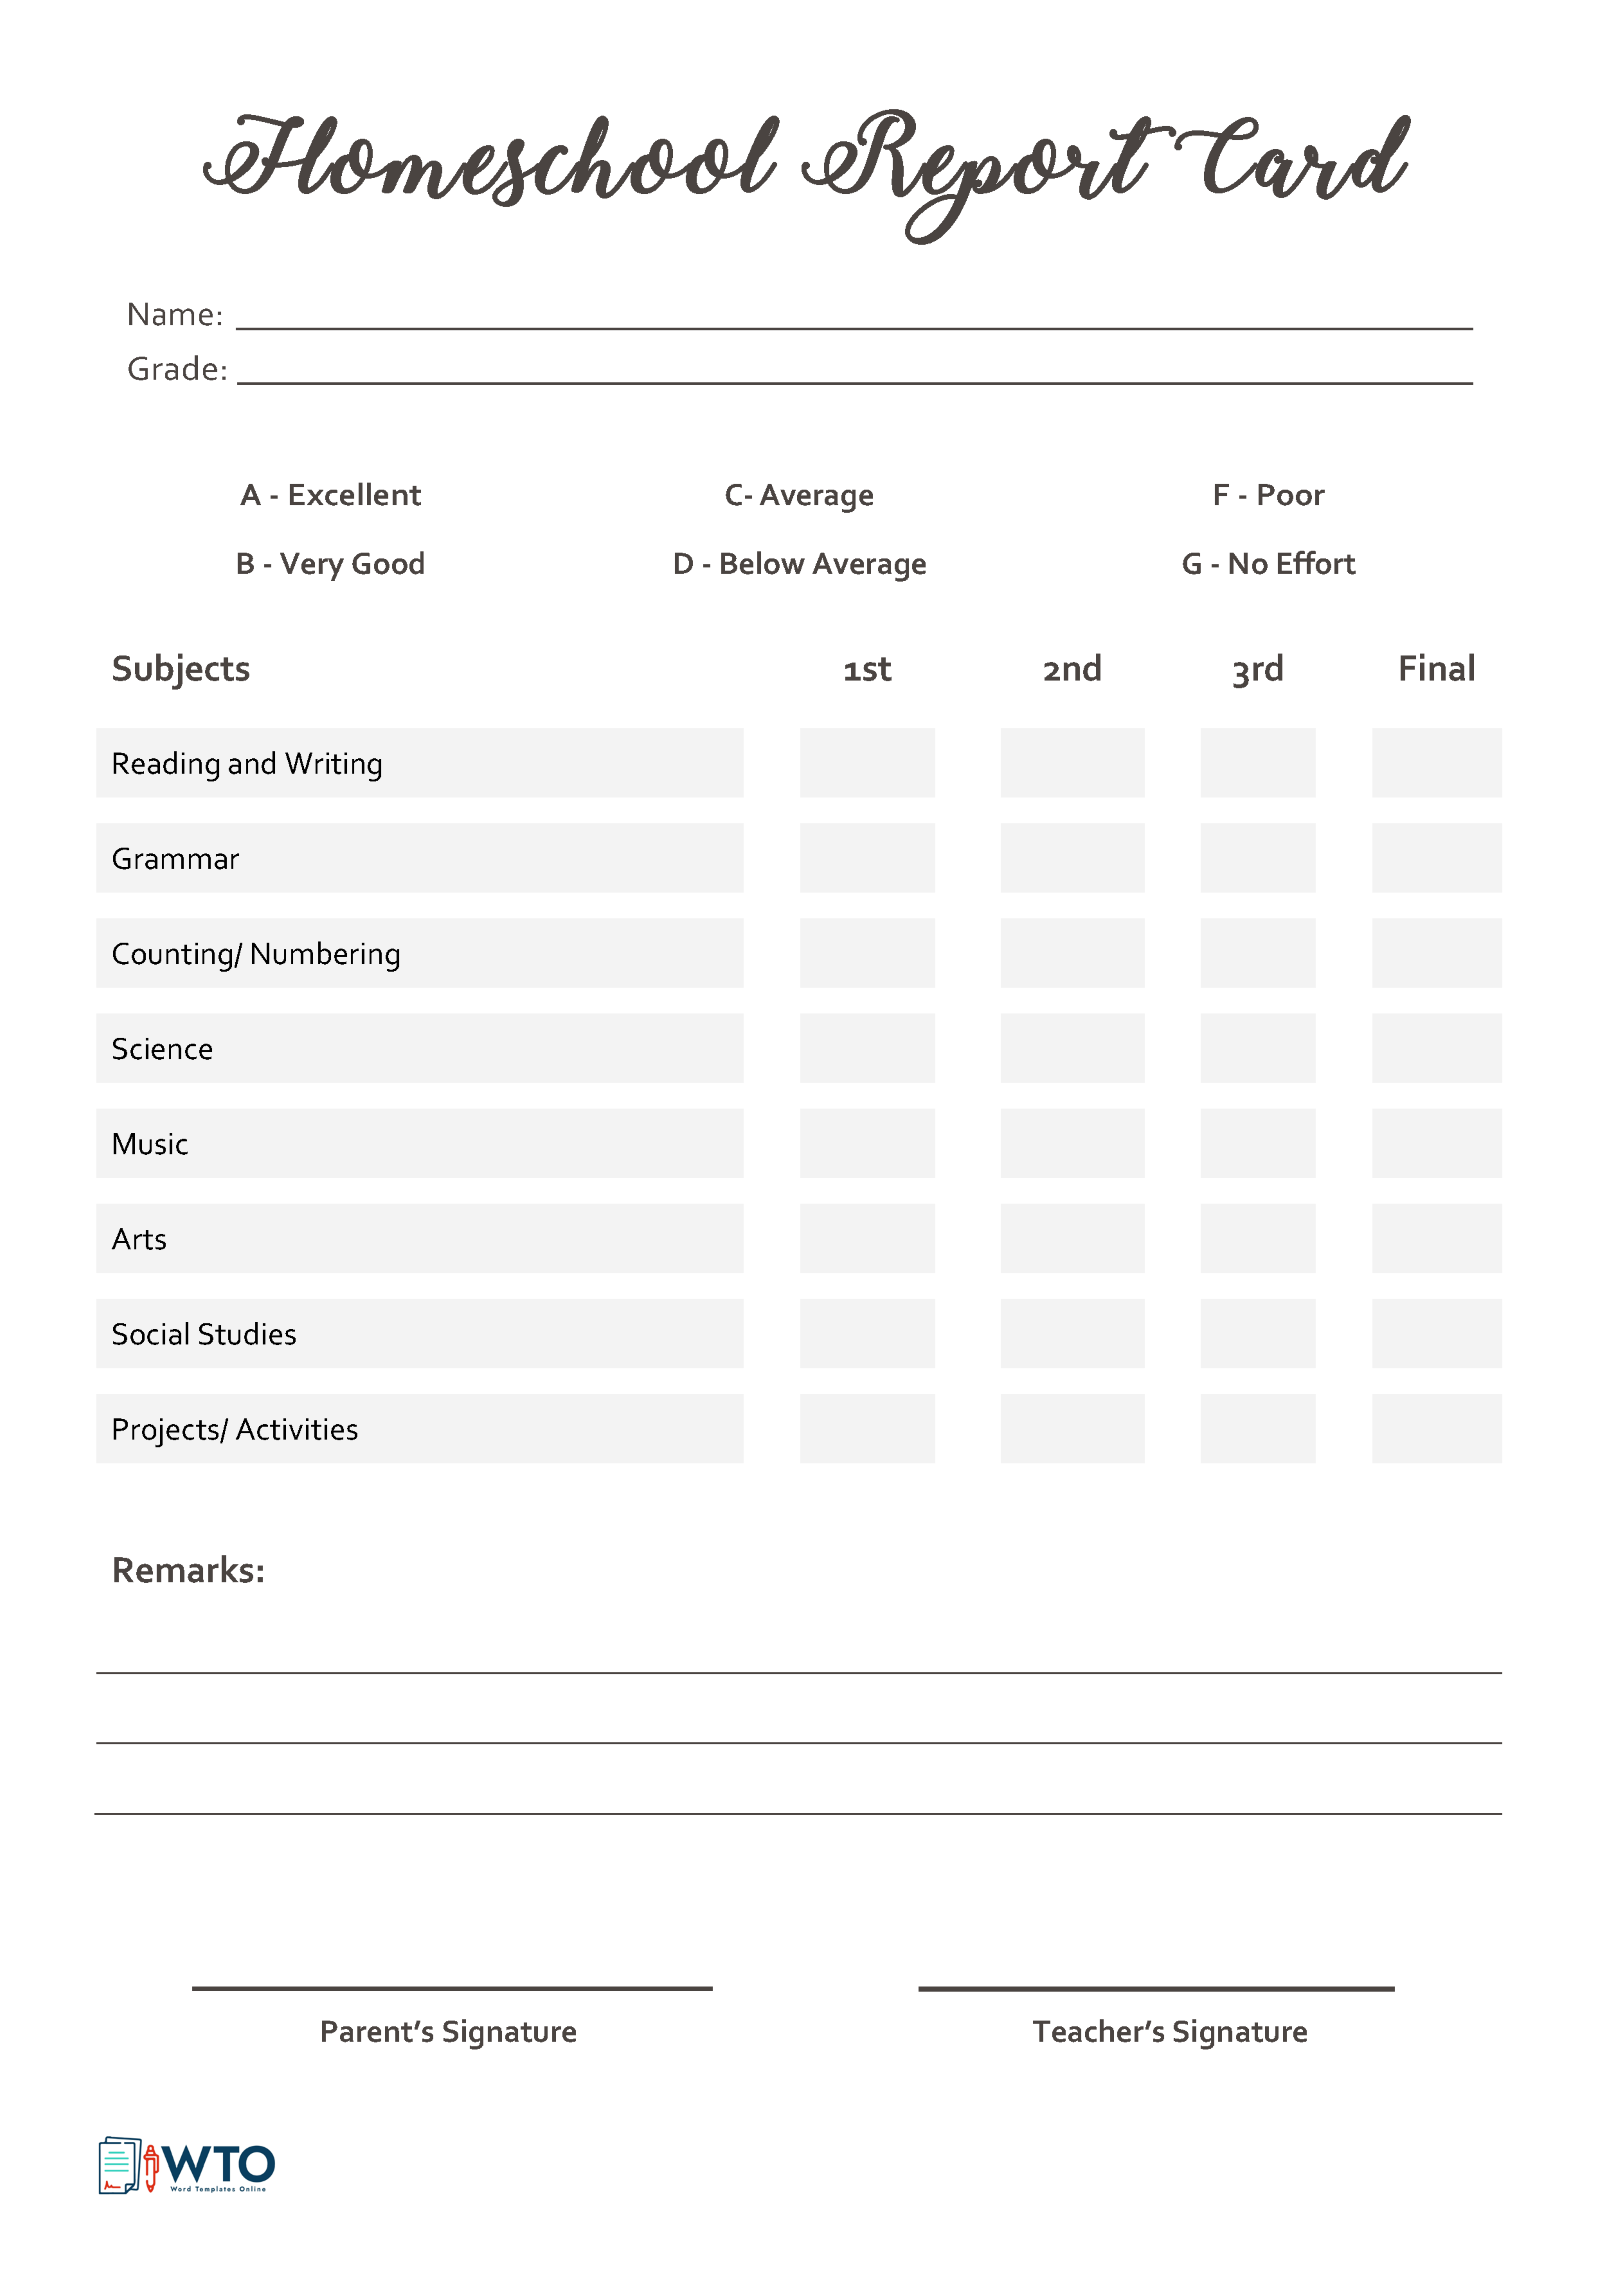 Example of a Homeschool Report Card - Format